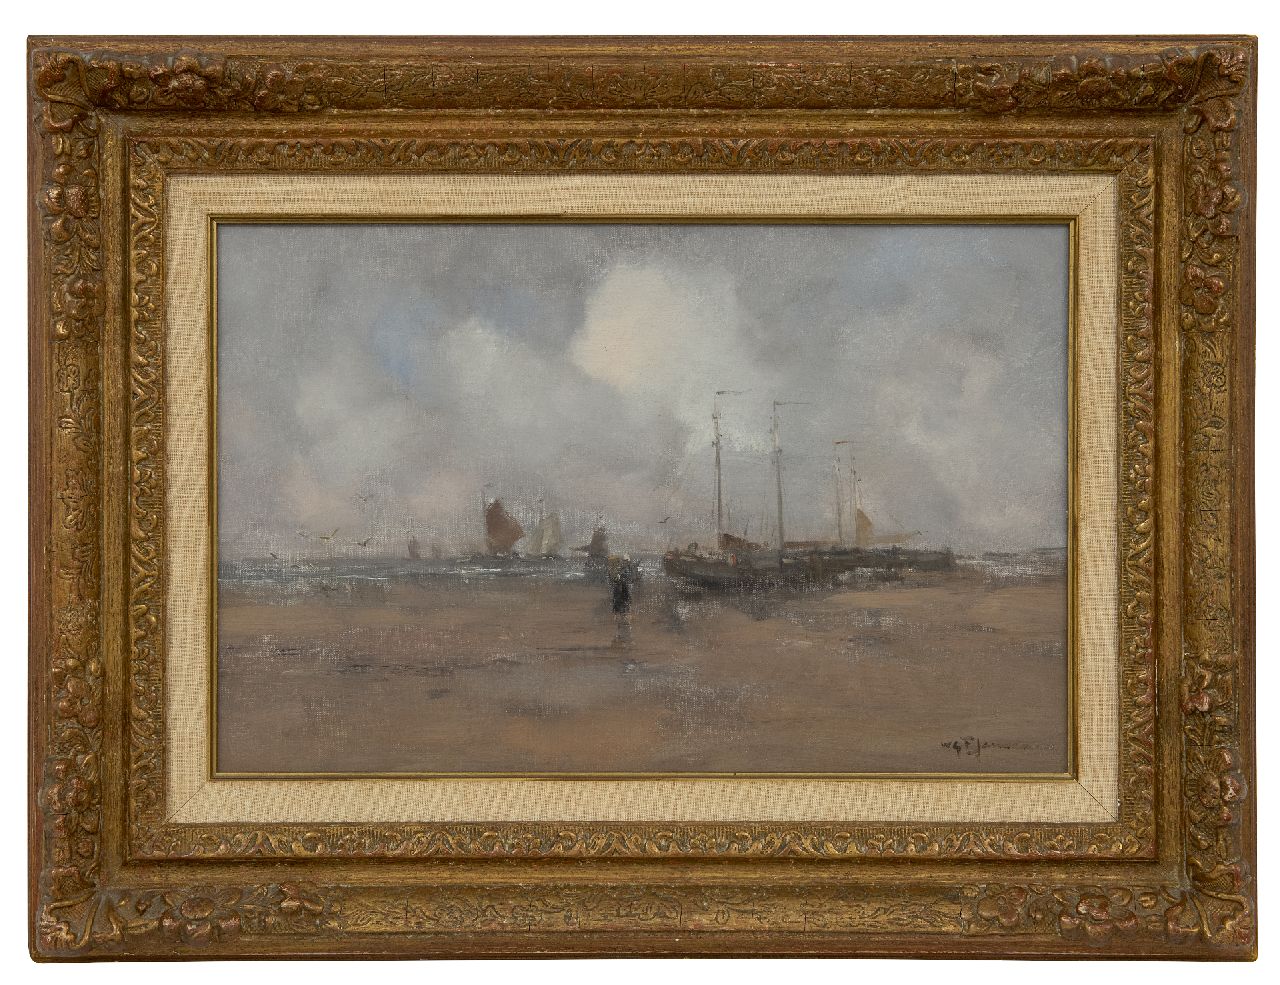 Jansen W.G.F.  | 'Willem' George Frederik Jansen | Paintings offered for sale | A beach scene with fisherman's wife and boats, oil on canvas 30.1 x 45.5 cm, signed l.r.